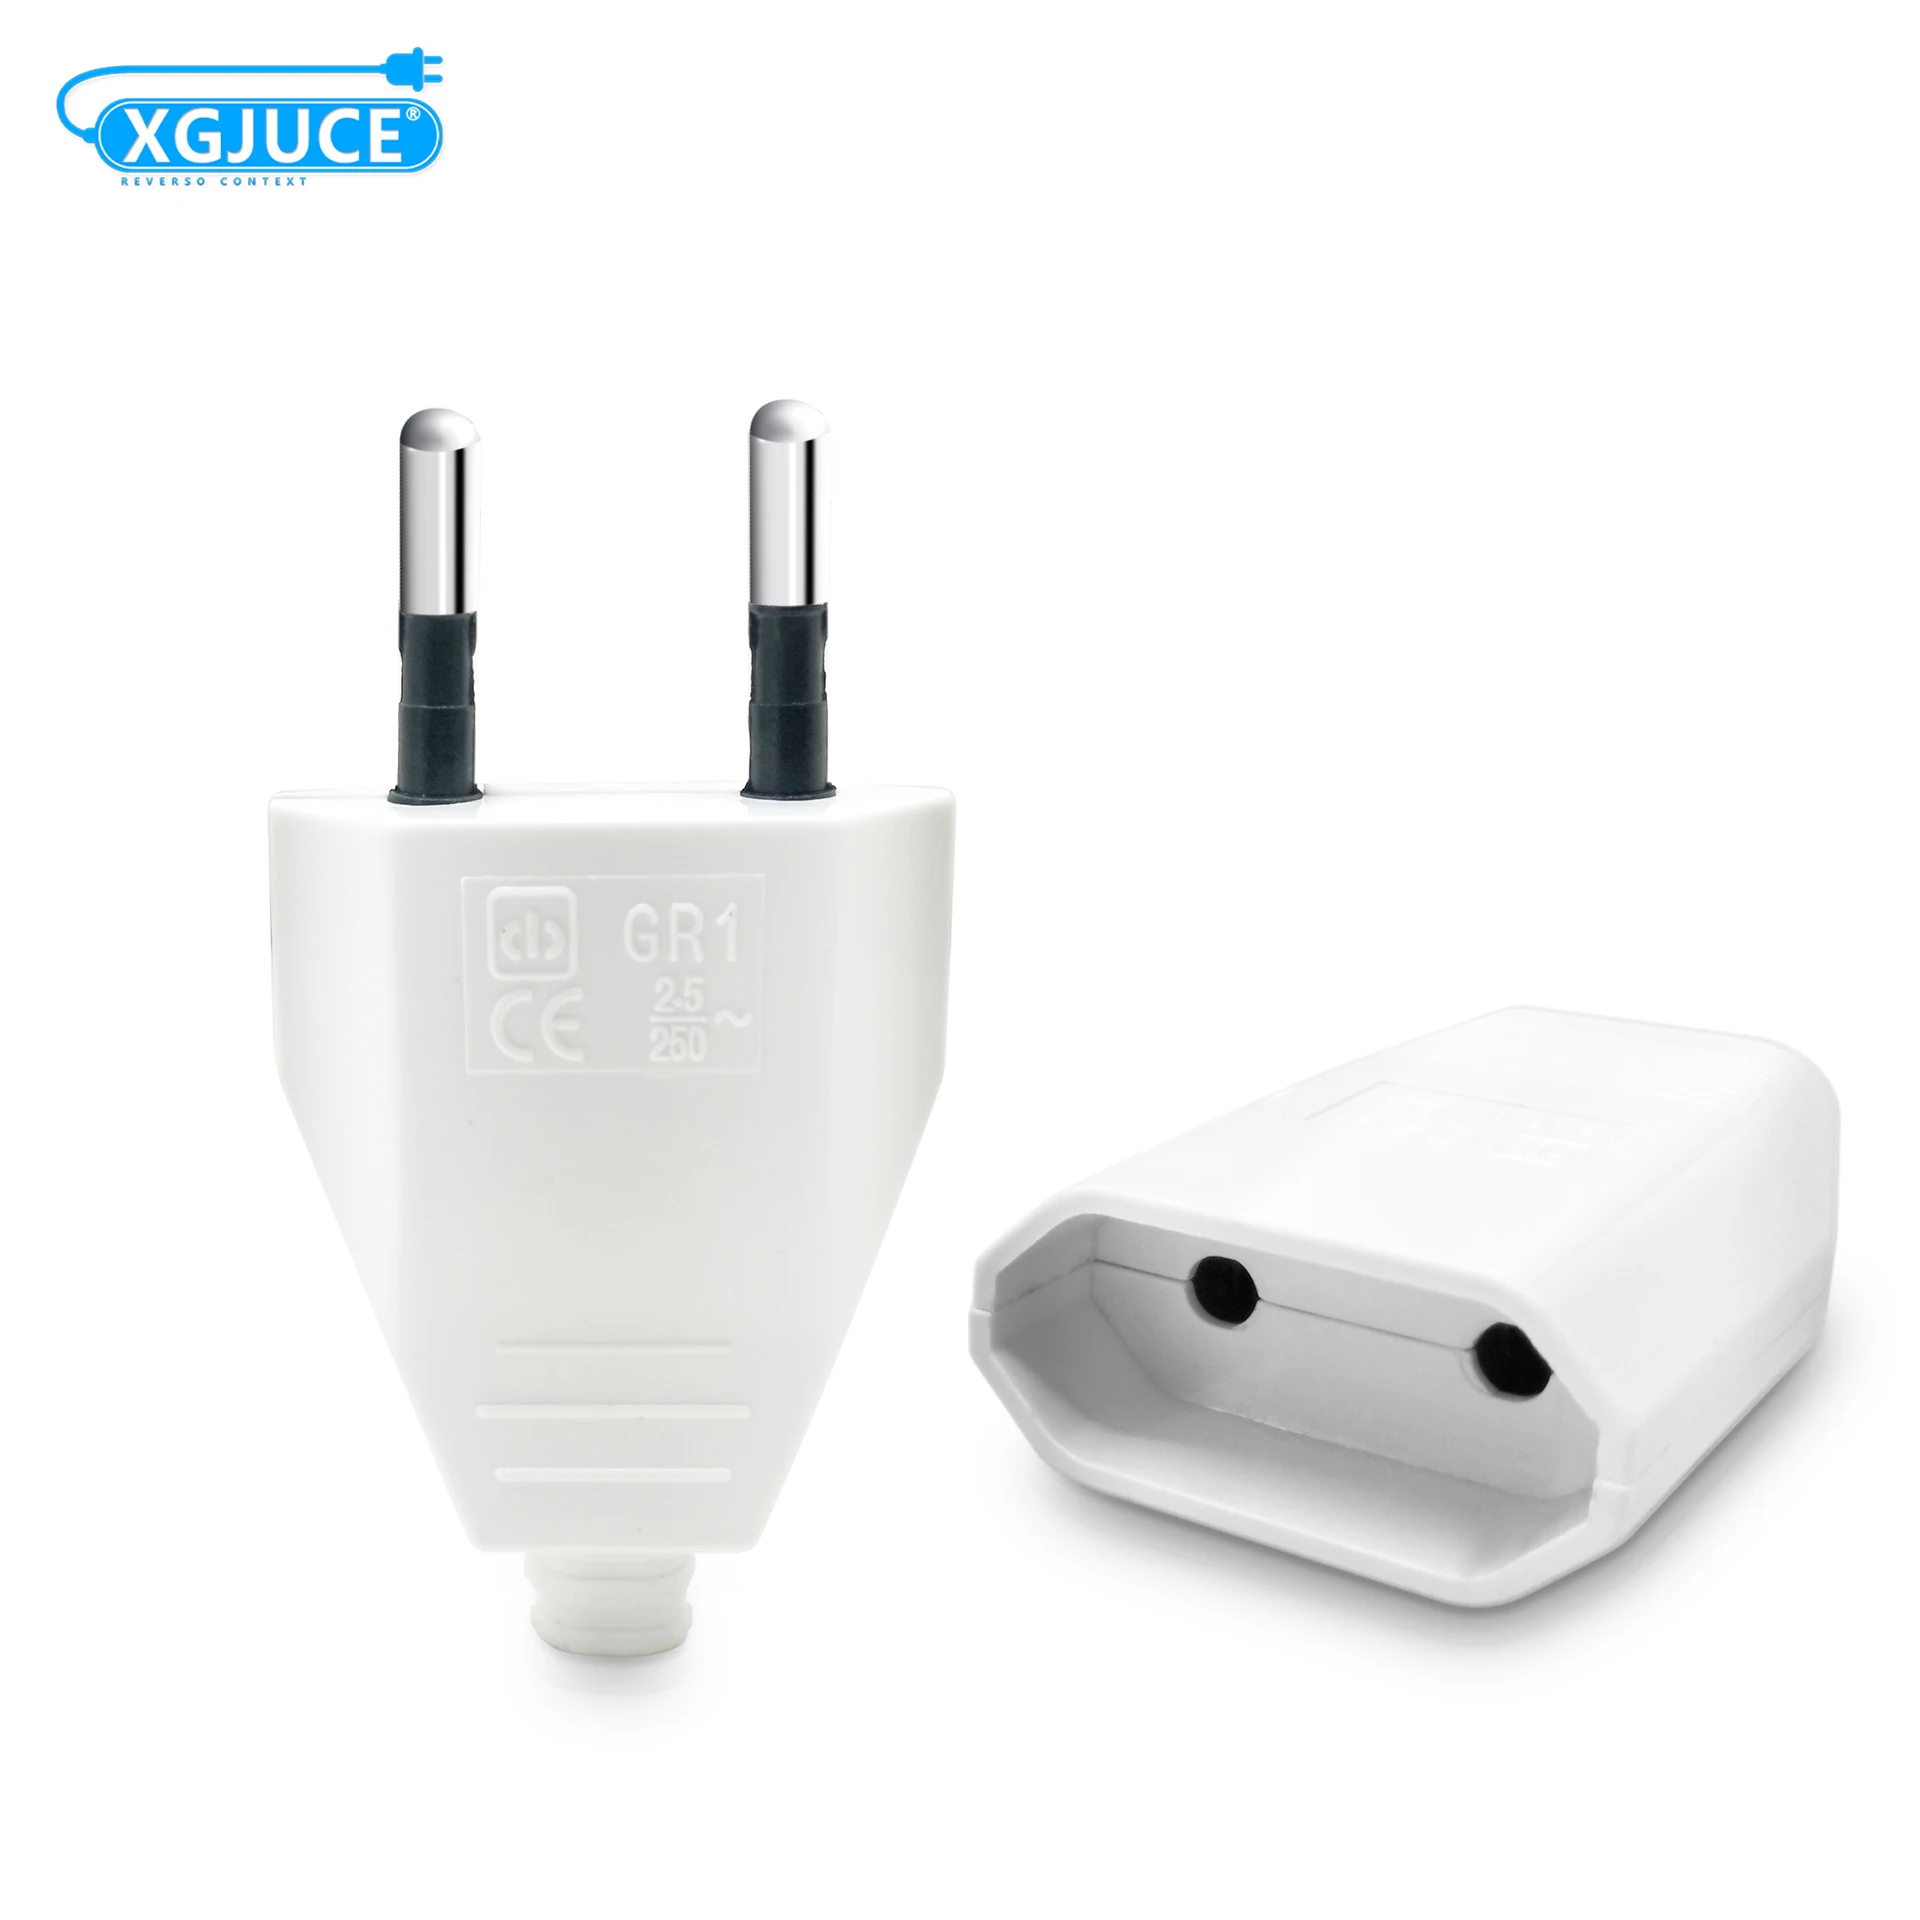 Plug Adapter European Socket Adapter Male Female 2 Pin AC Electrical Connector Wire Rewireable Extension For Korea Spain Israel